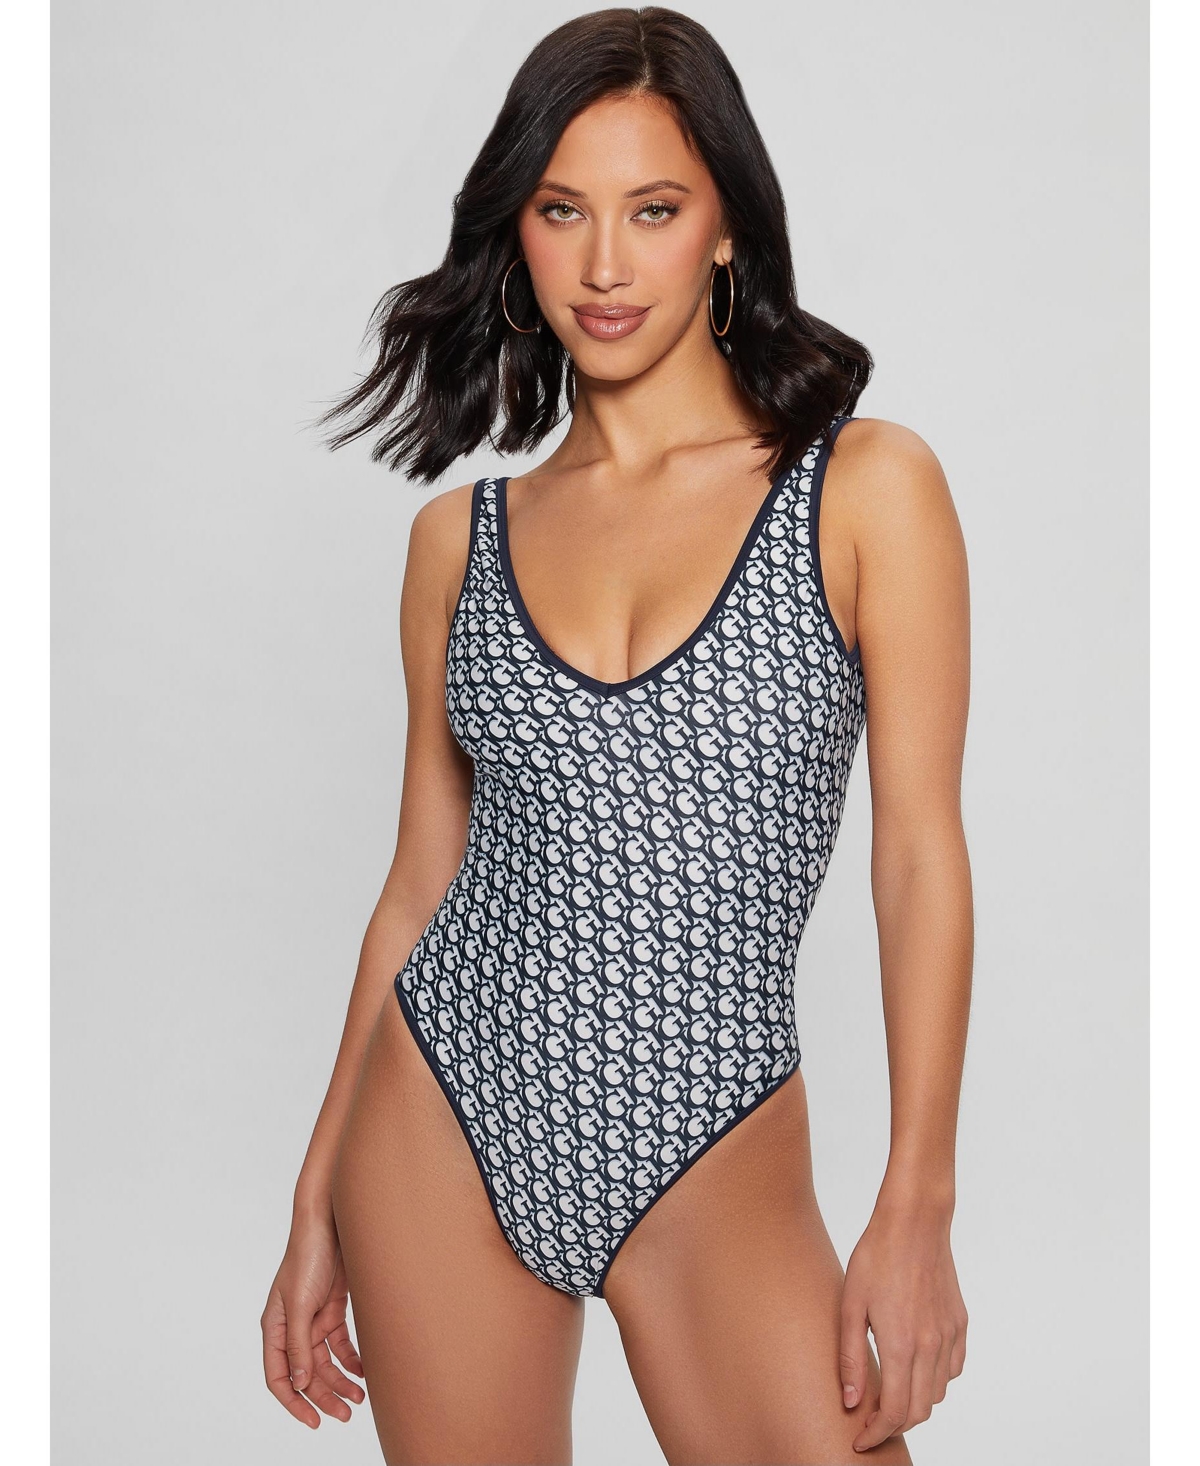 Women's Signature Printed One-Piece - Gj double layer blue